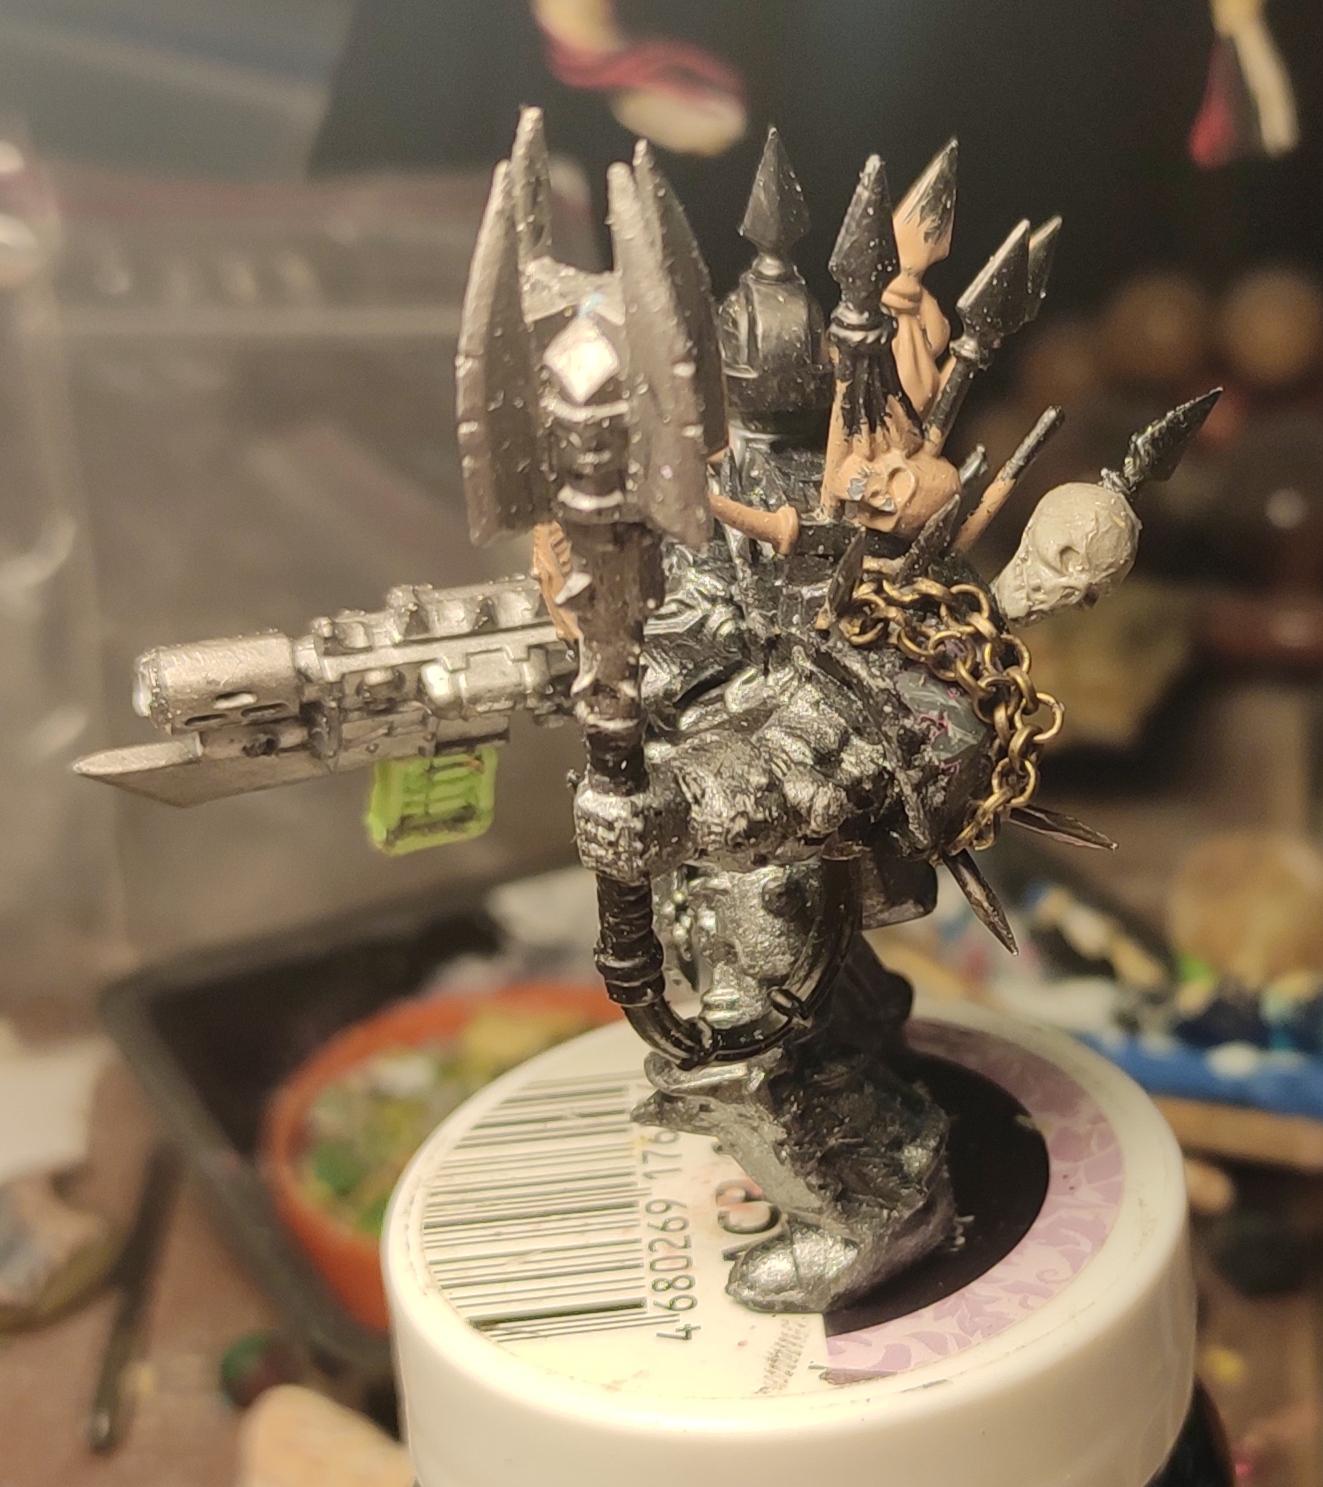 Chain, Chaos, Chaos Space Marines, Chaos Undivided, Combiweapon, Conversion, Heresy, Heretic Astartes, Infantry, Iron Warriors, Iron Within, Iron Without!, Kitbash, Power Maul, Terminator Armor, Traitor Legions, Trophy, Warhammer 40,000, Work In Progress